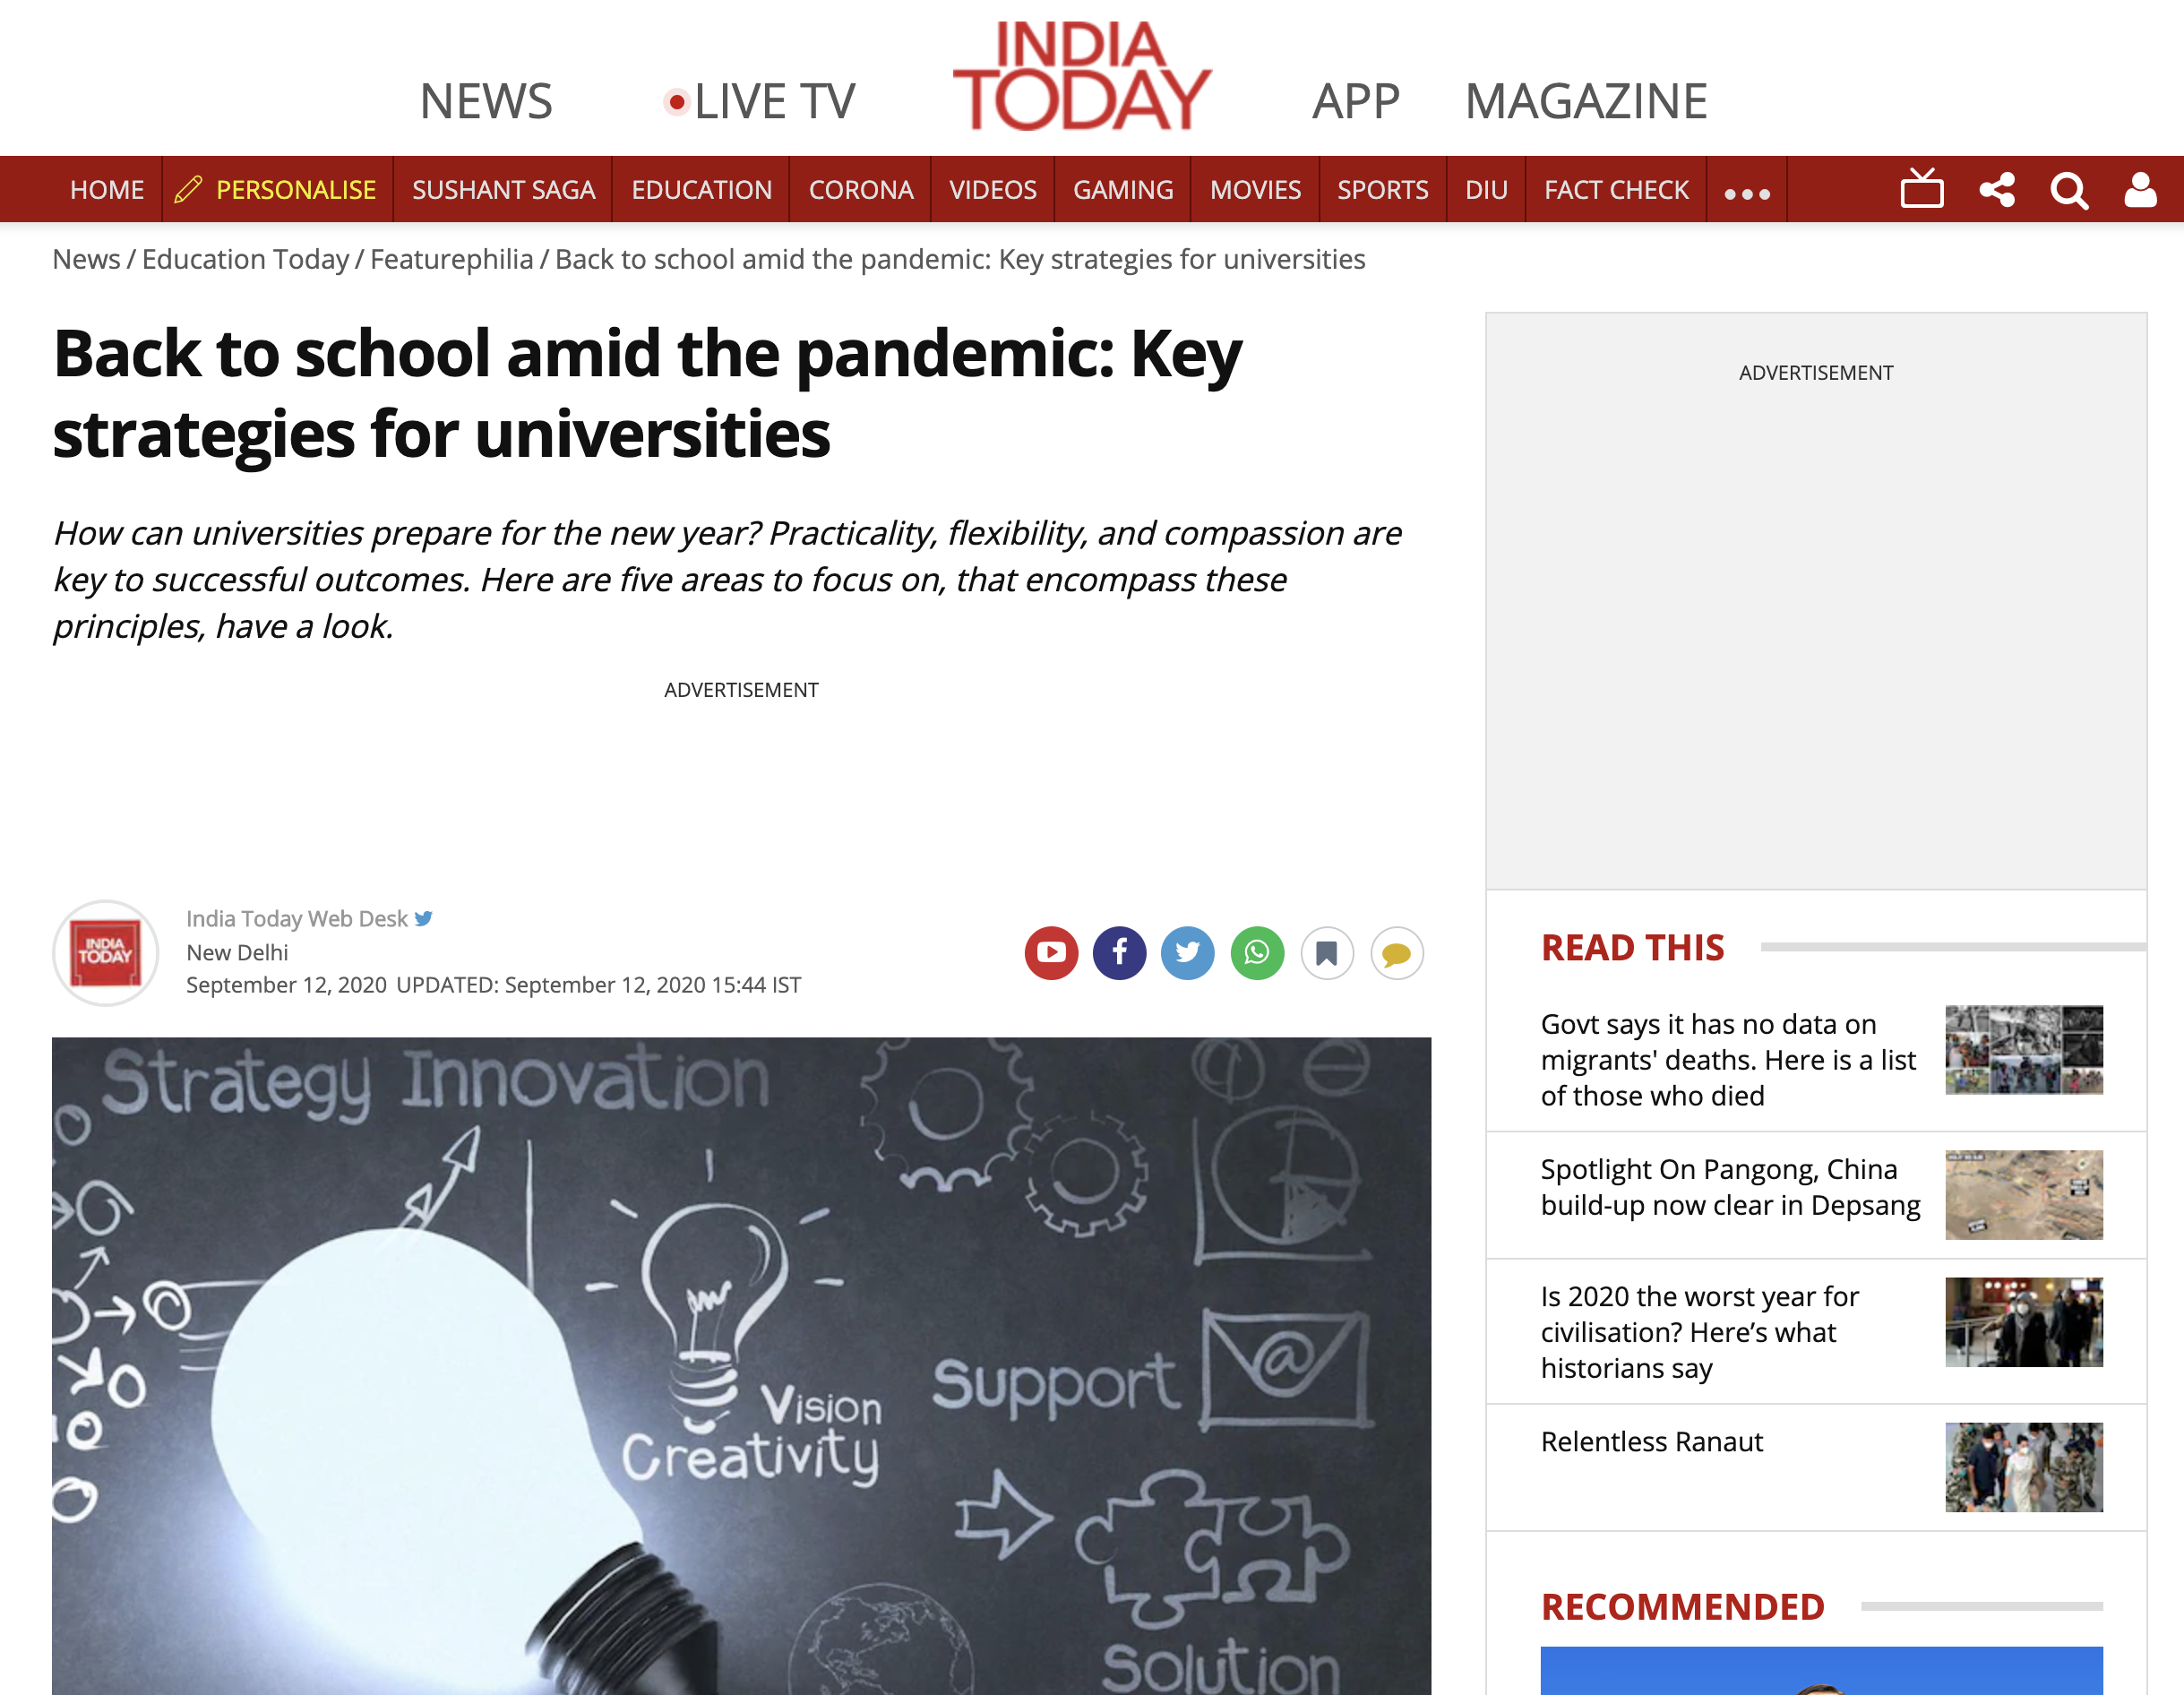 Back to school amid the pandemic: Key strategies for universities